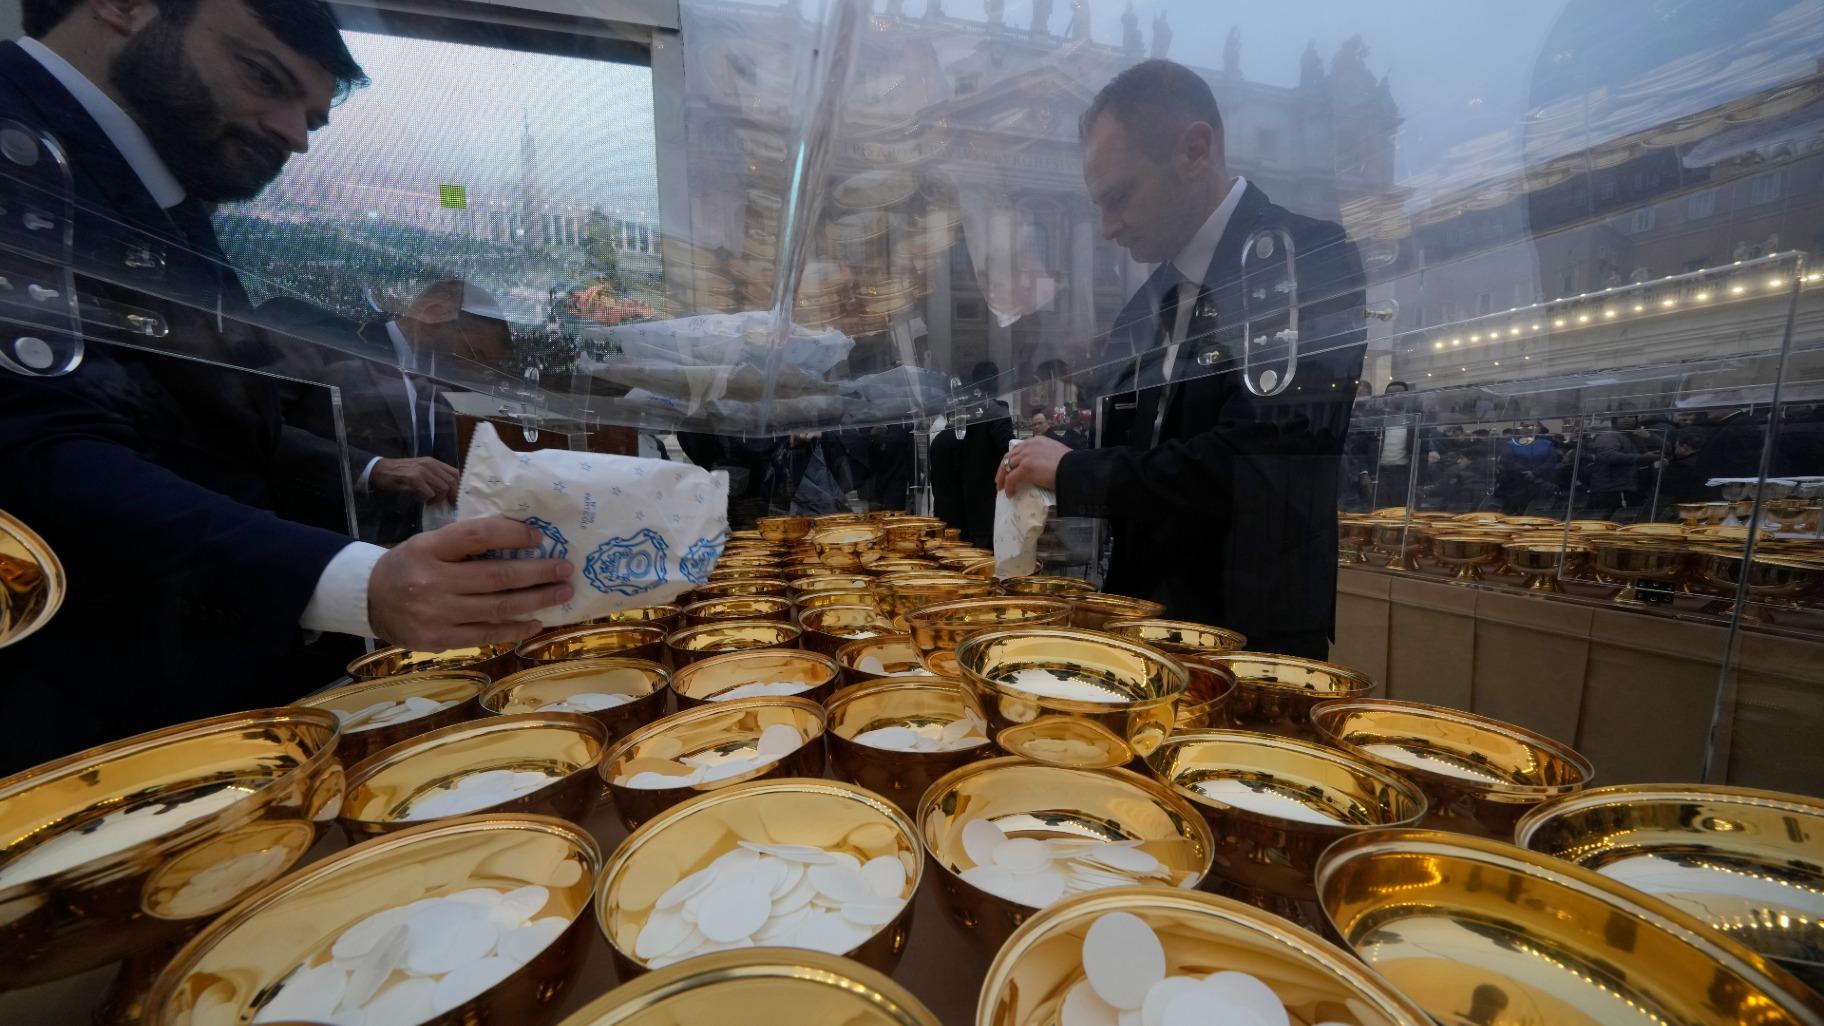 Holy communion vessels are filled ahead of the funeral mass for late Pope Emeritus Benedict XVI in St. Peter's Square at the Vatican, Thursday, Jan. 5, 2023. (AP Photo / Andrew Medichini)